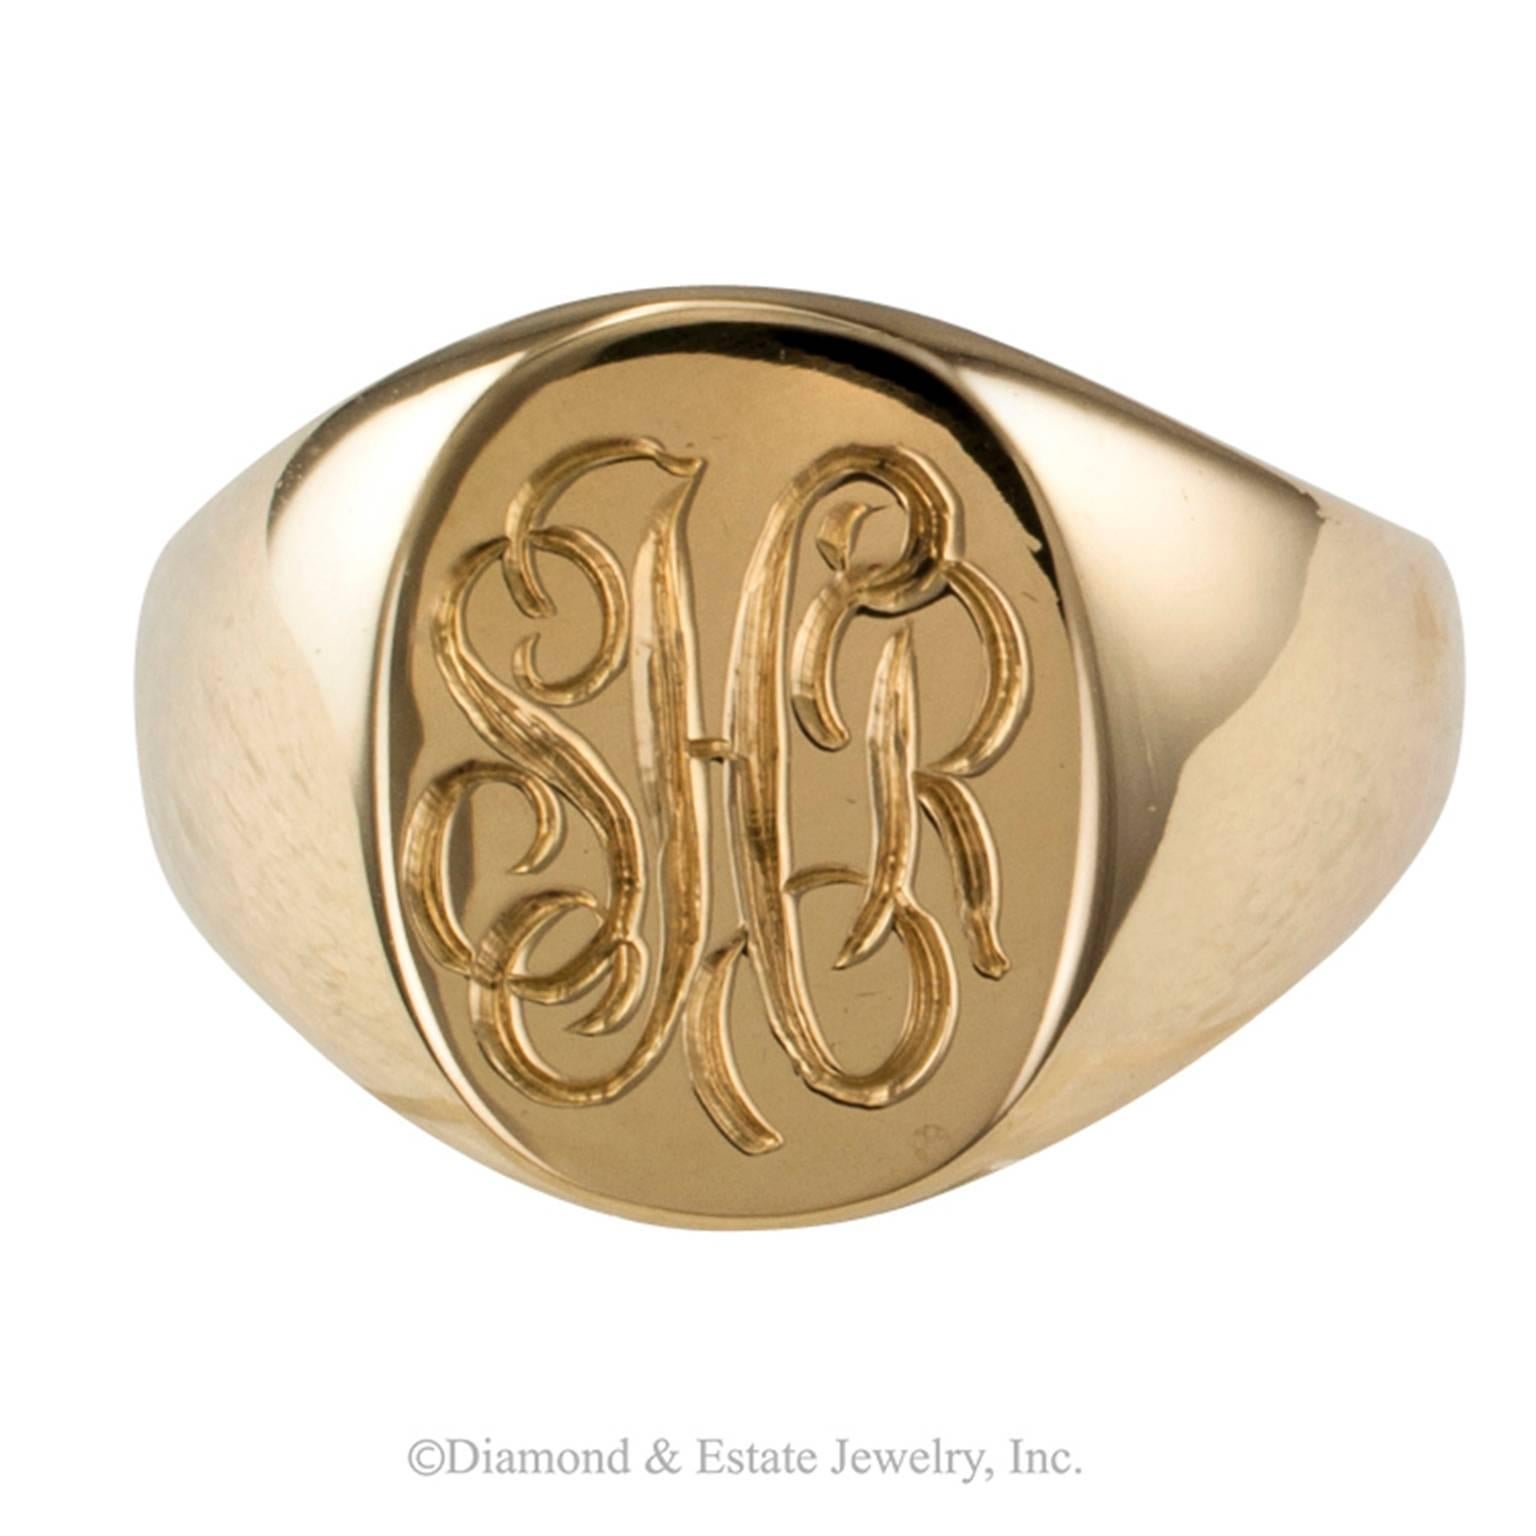 Tiffany & Co 18-Karat Gold Signet Ring

Tiffany & Co. classic 18-karat yellow gold signet ring circa 1970.
RING SIZE:  6 3/4+,
DIMENSION: 9/16" wide vertical to the fingernail.